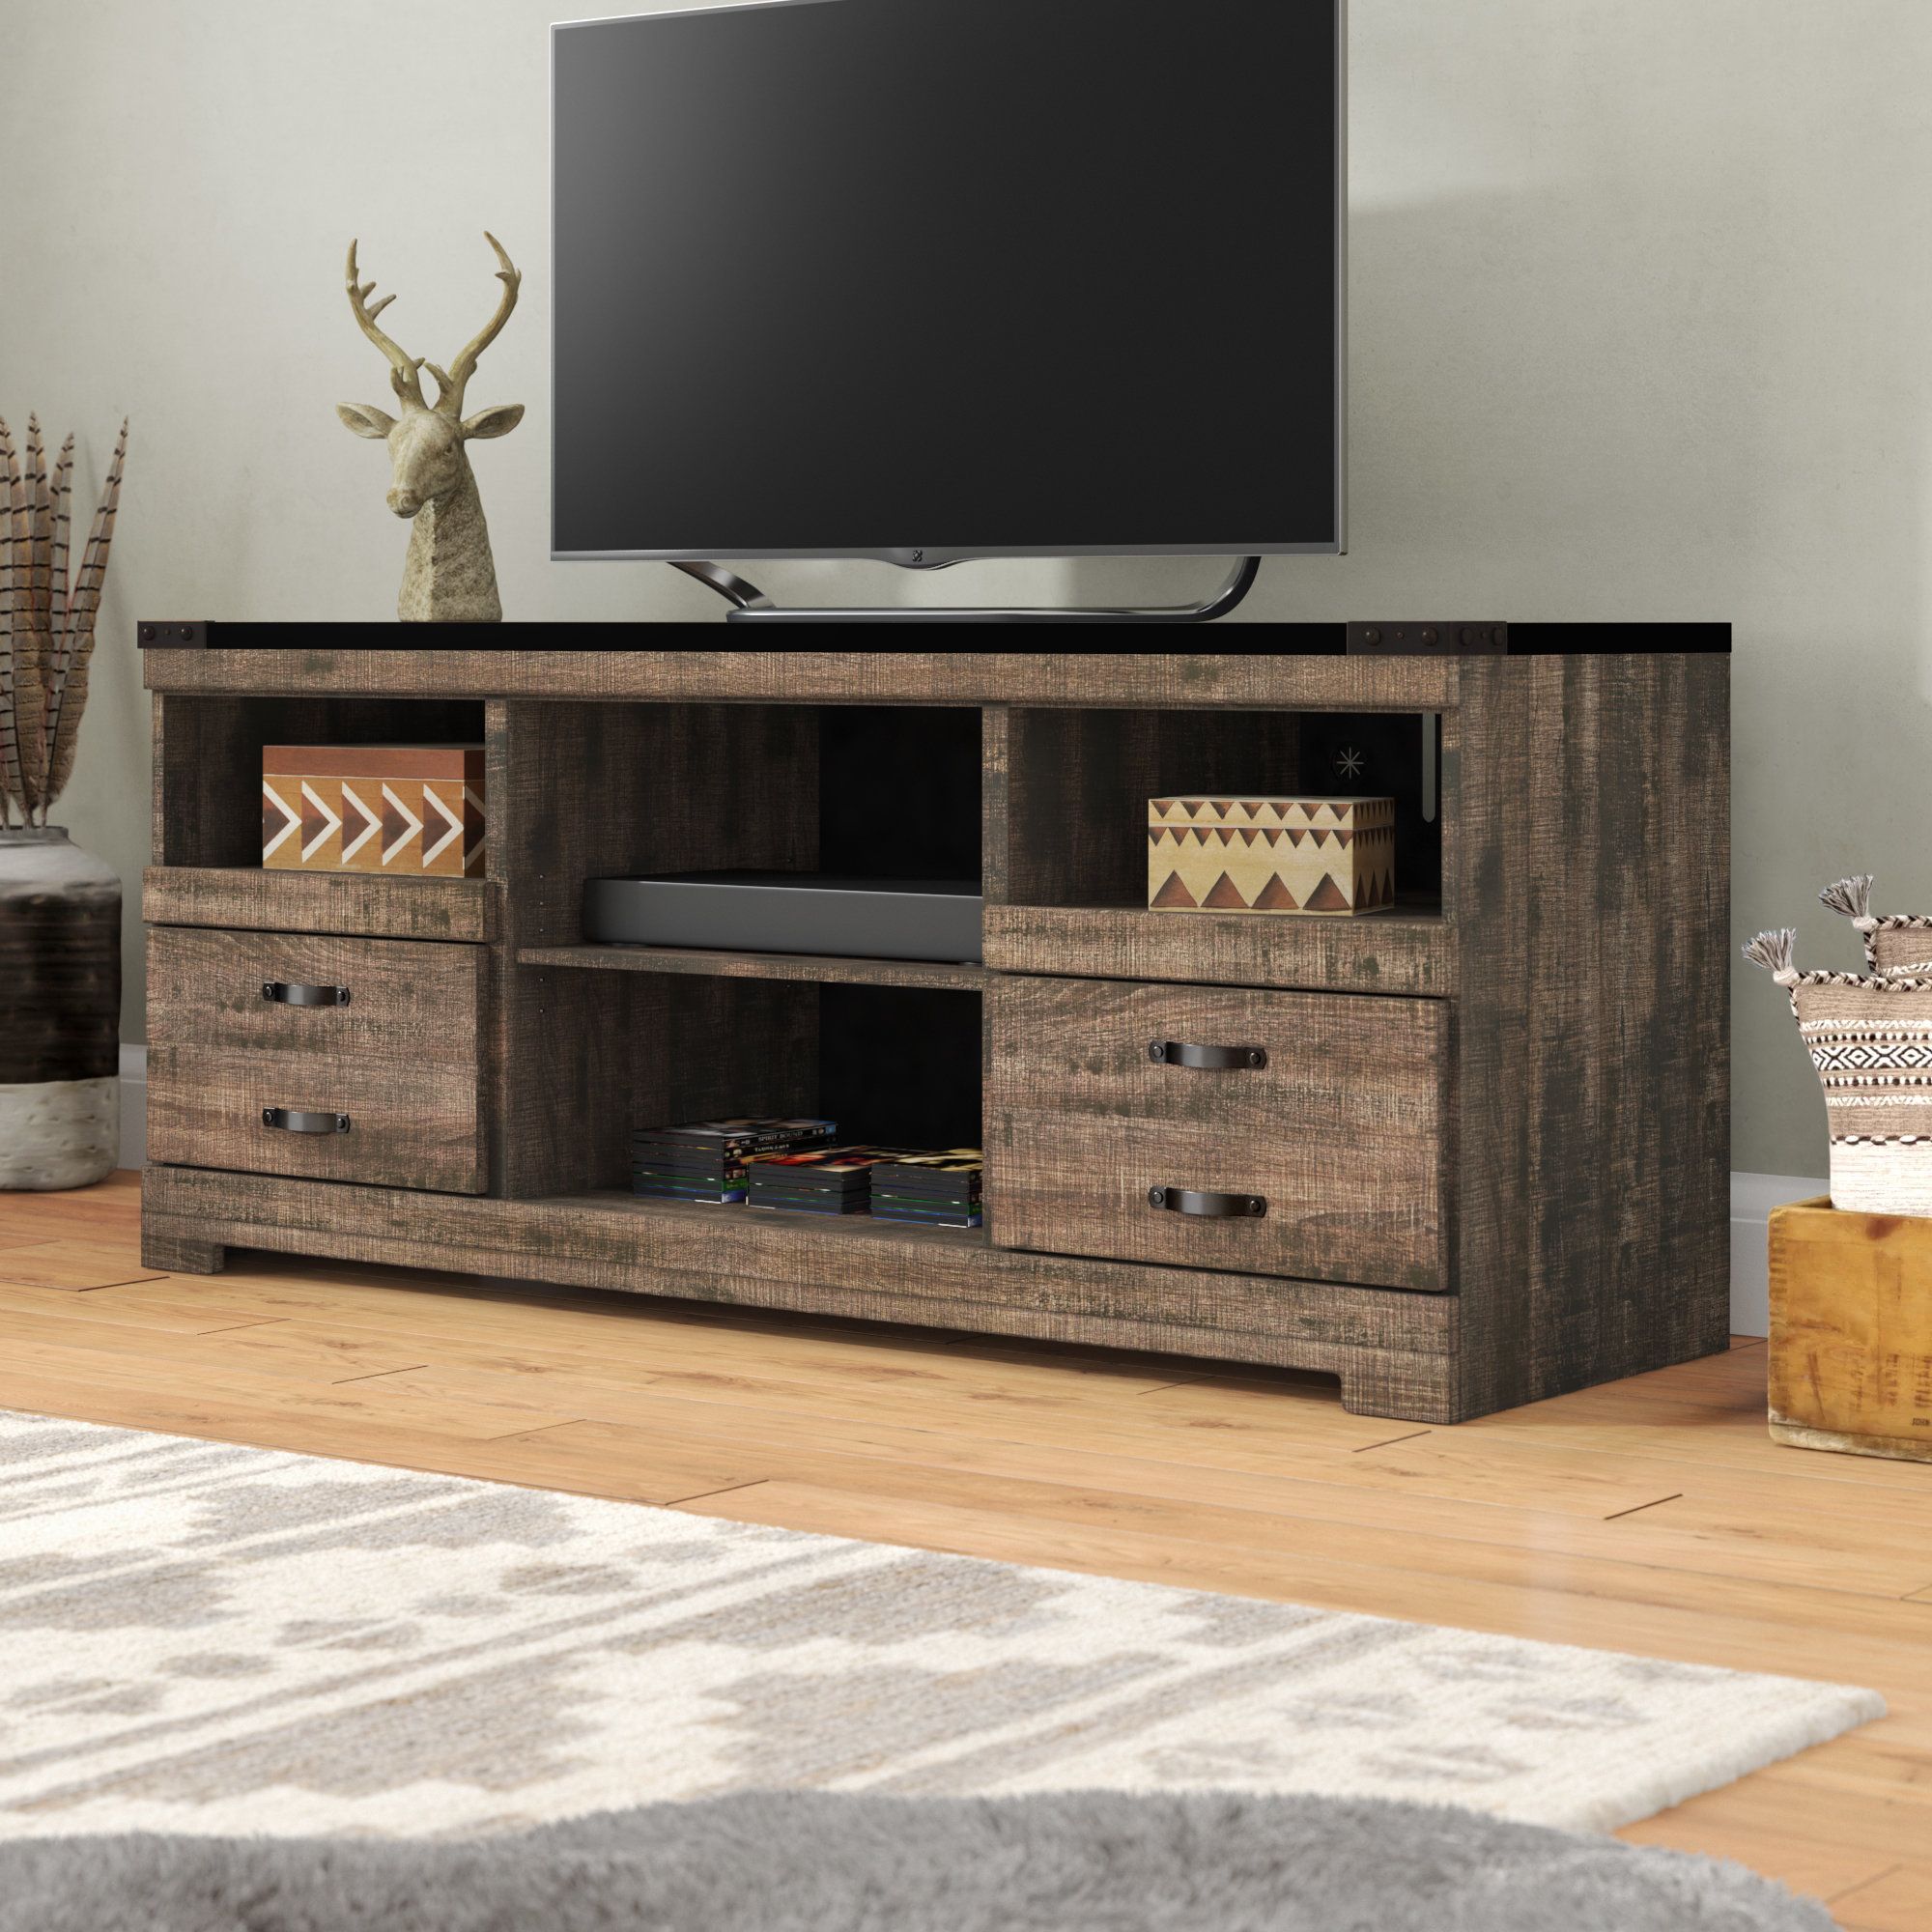 Loon Peak Gage Tv Stand For Tvs Up To 60" & Reviews | Wayfair With Vista 60 Inch Tv Stands (View 7 of 30)